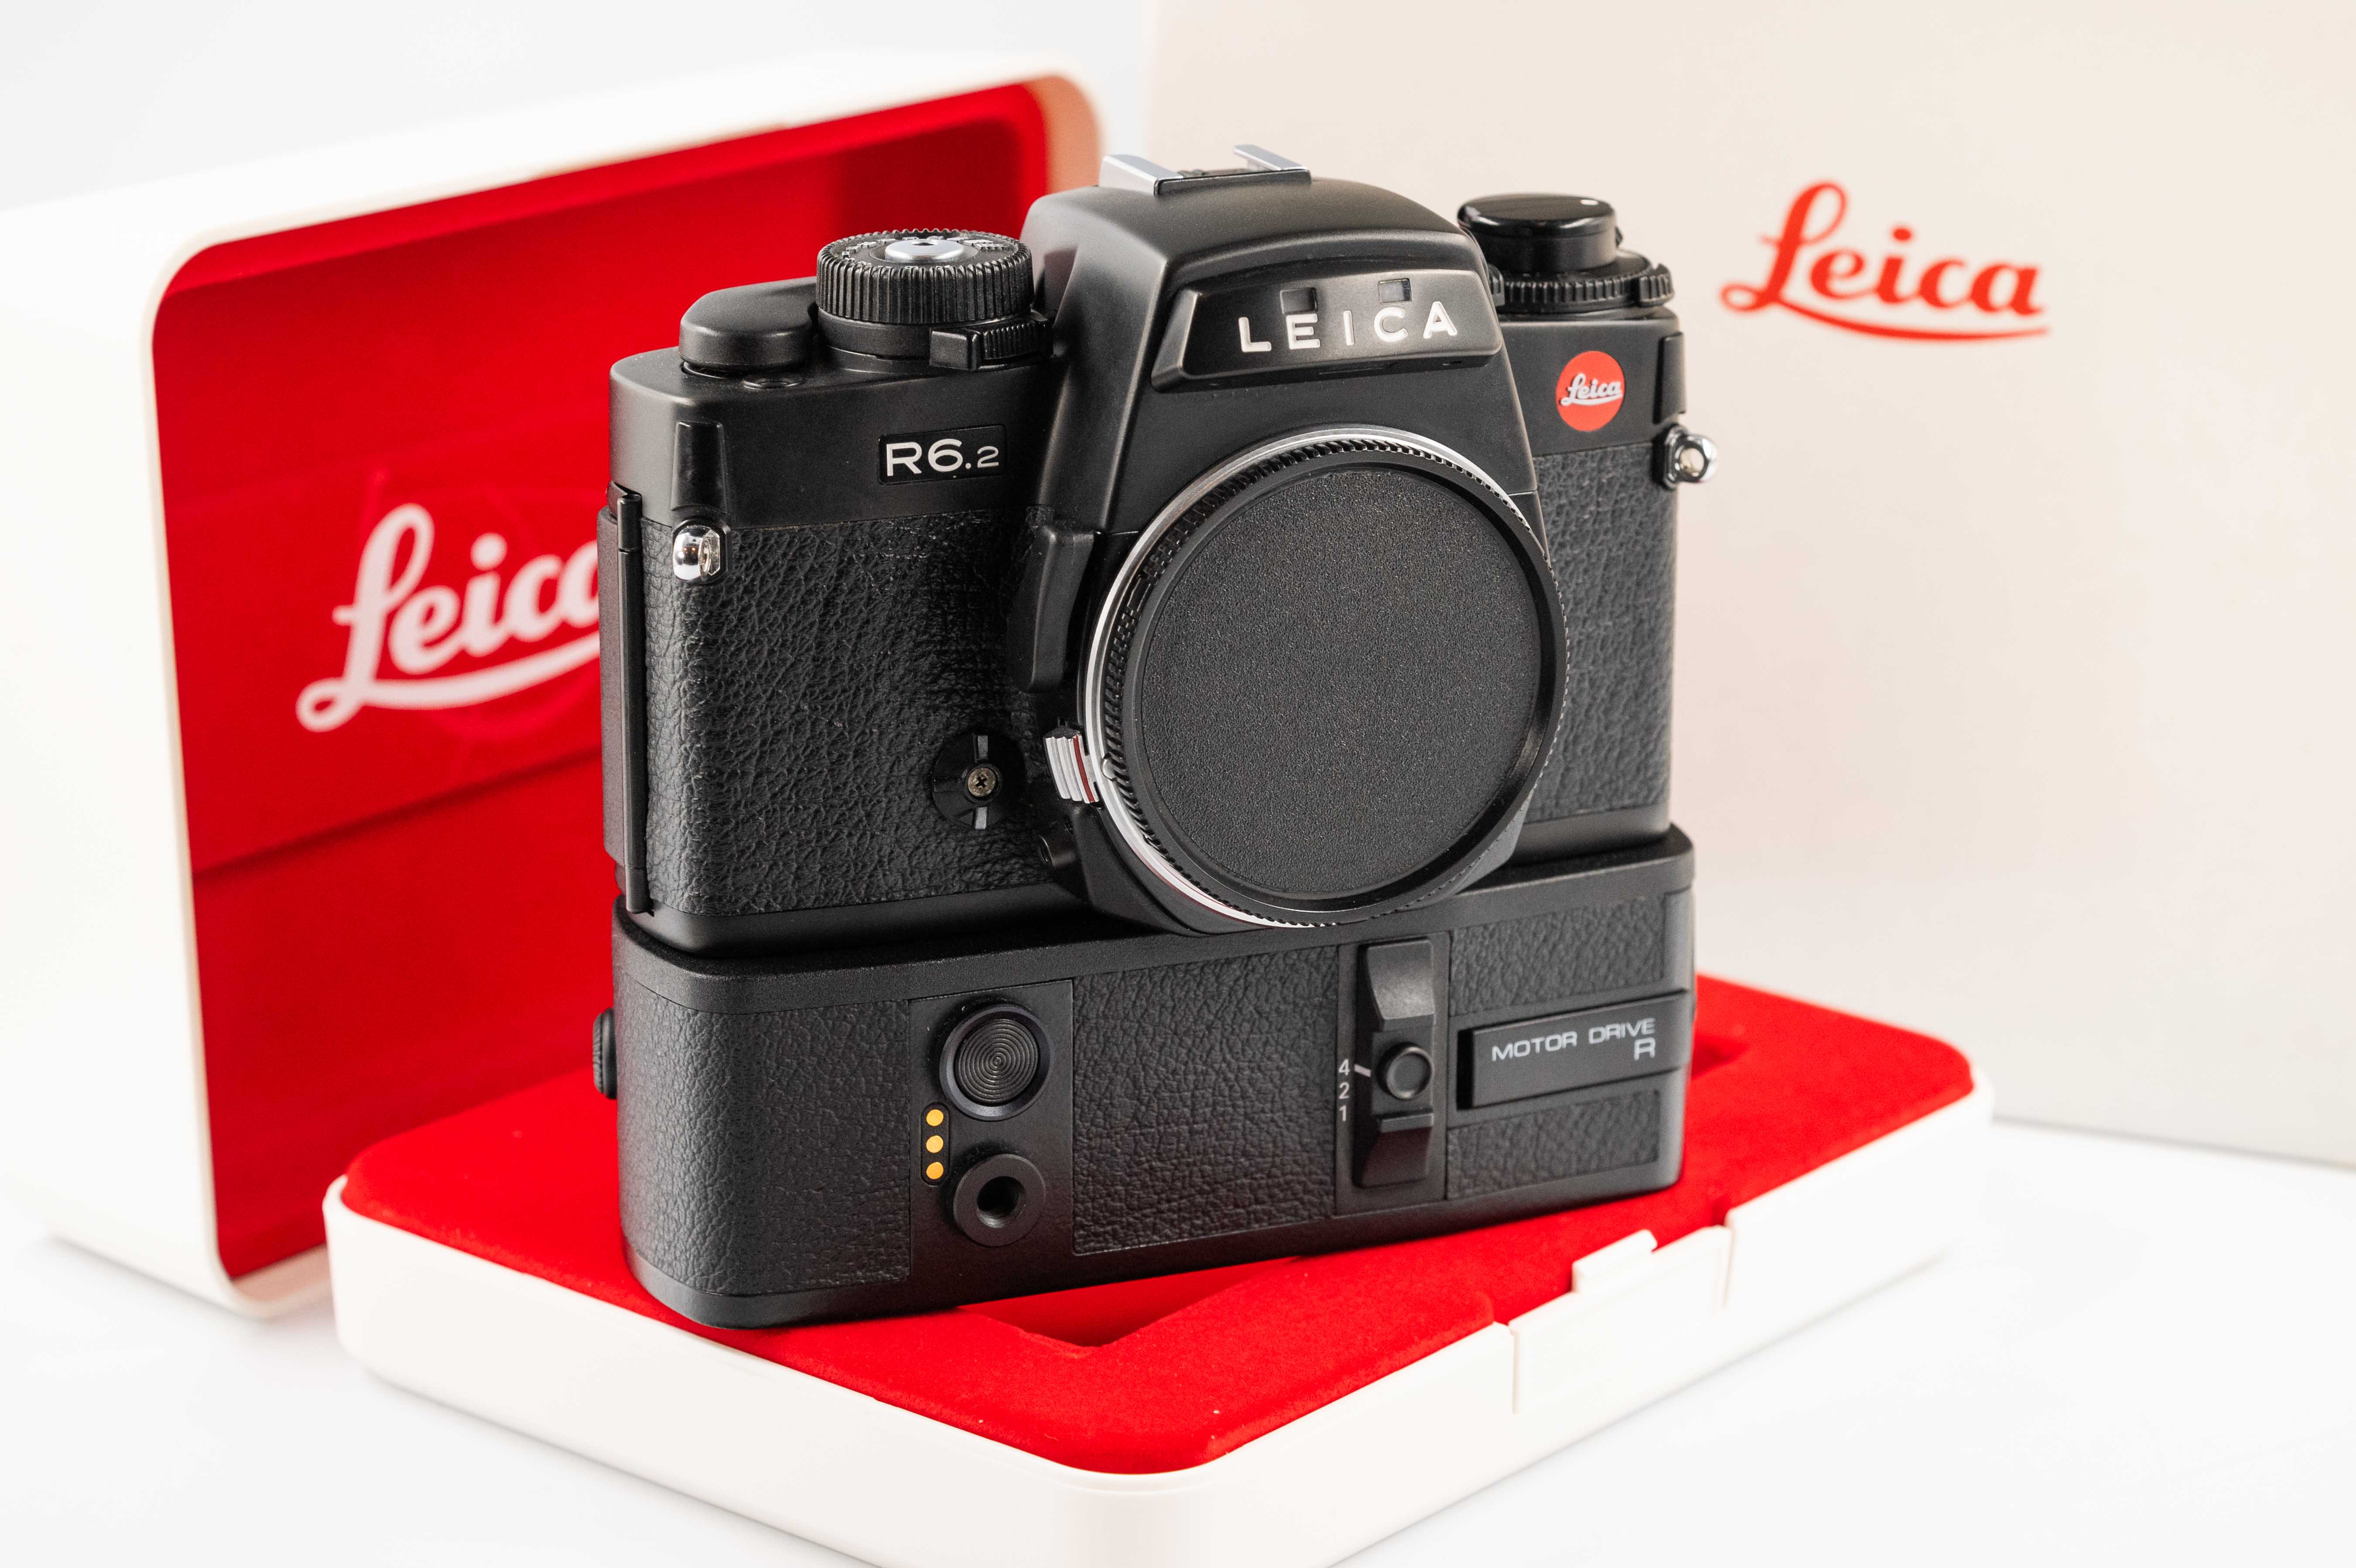 Leica R6.2 Black with Motor-Drive R 10074